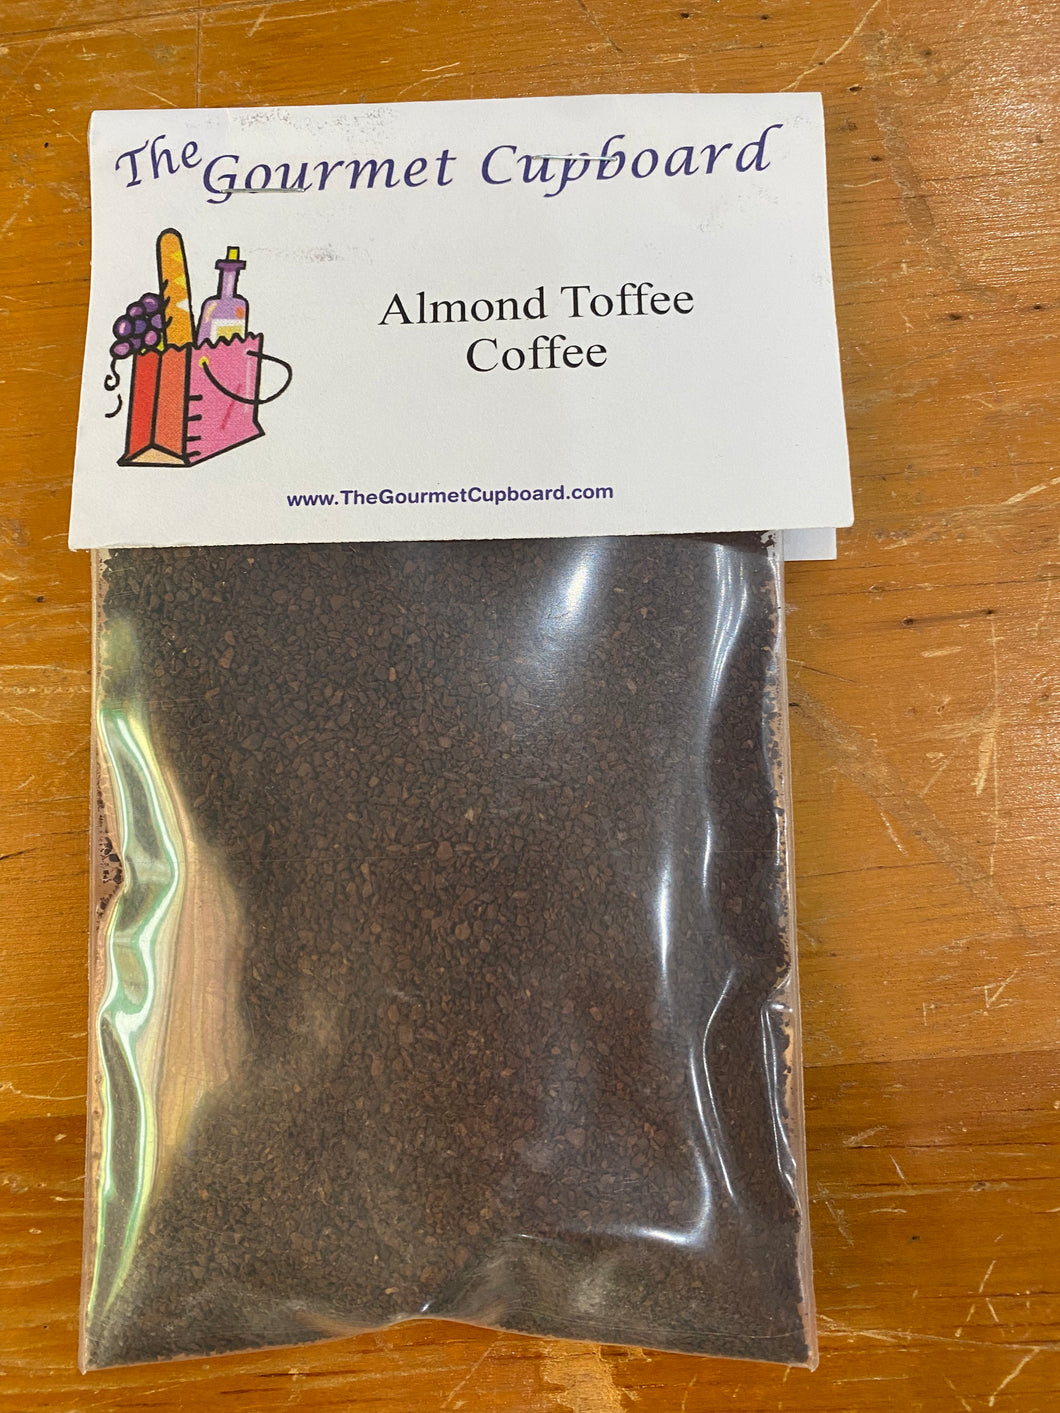 Almond Toffee Coffee